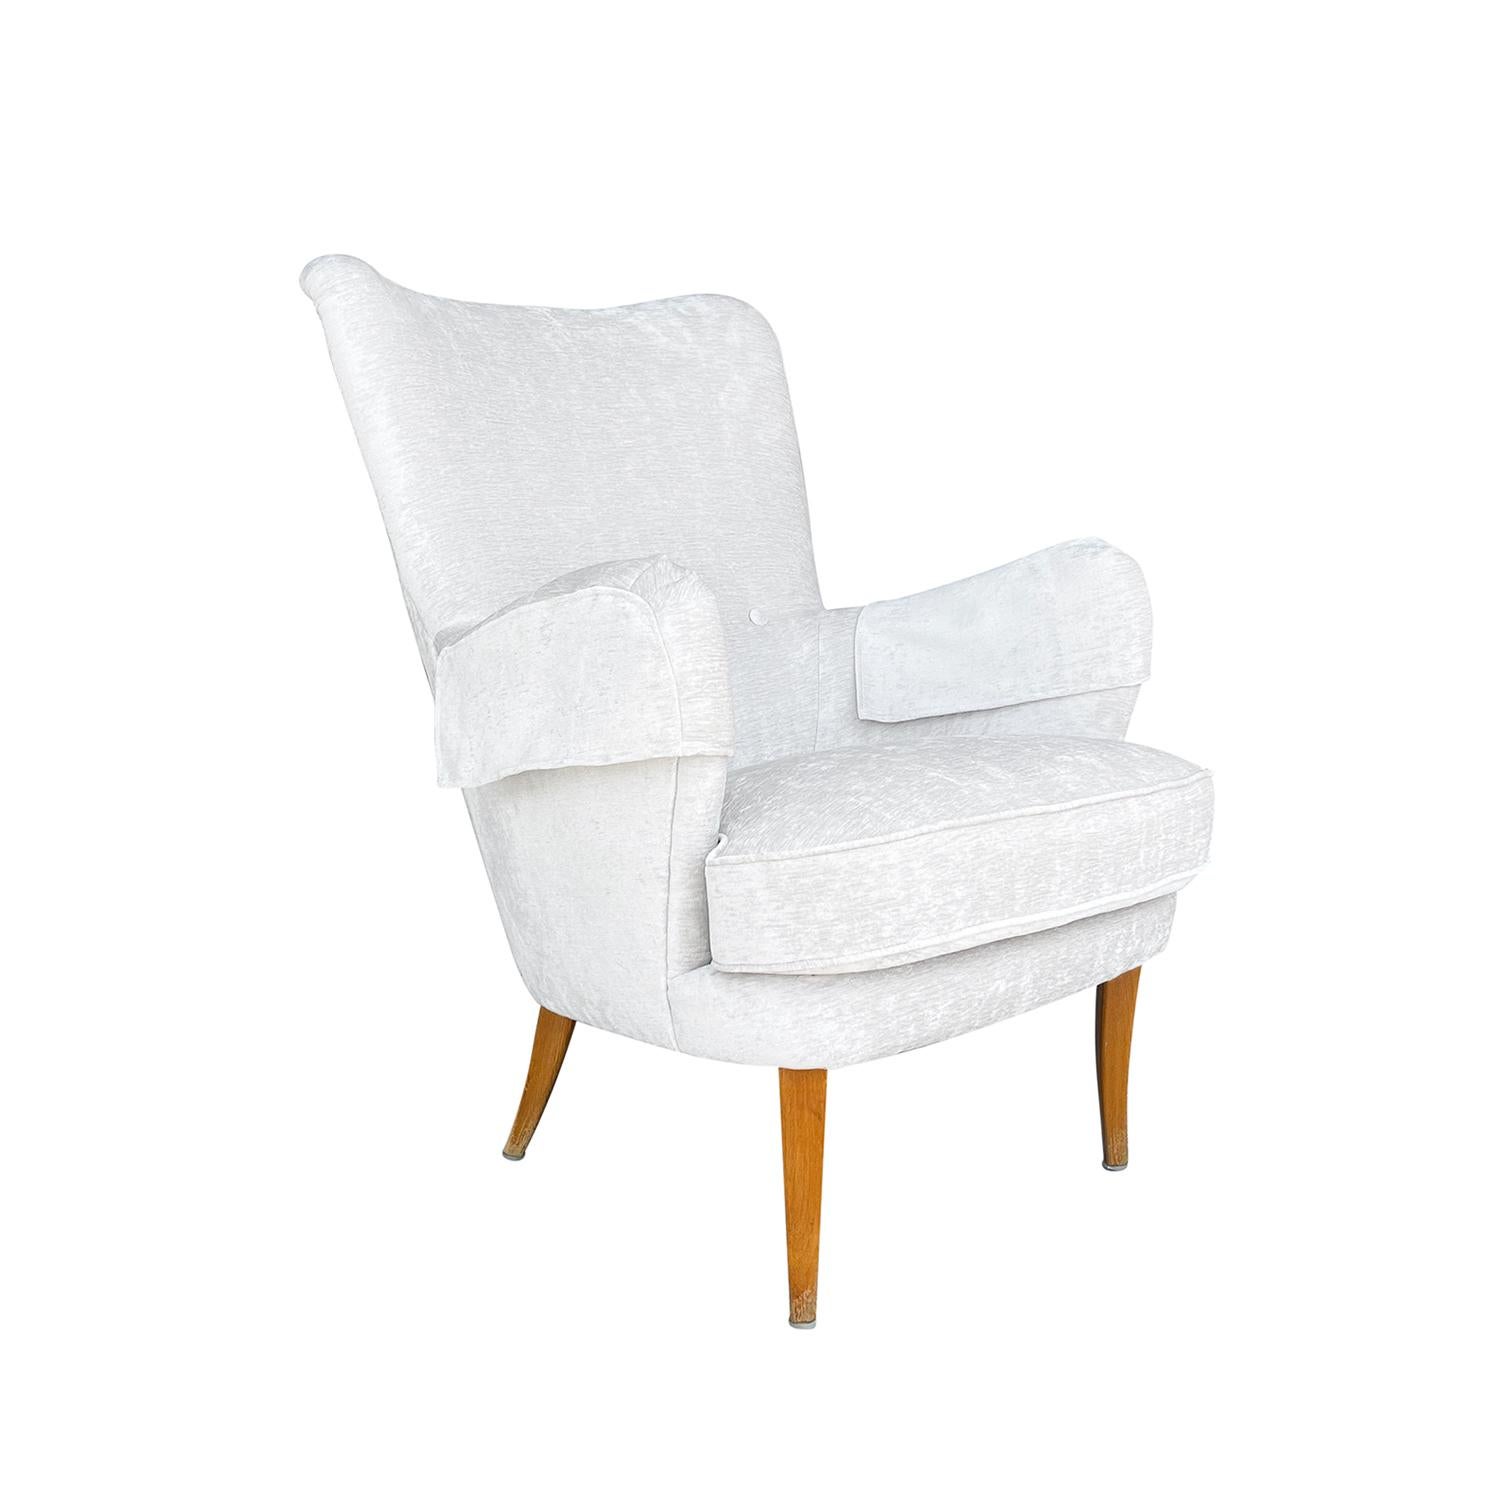 Hand-Carved 20th Century Single Swedish Armchair - Vintage Side Chair by Carl Malmsten For Sale